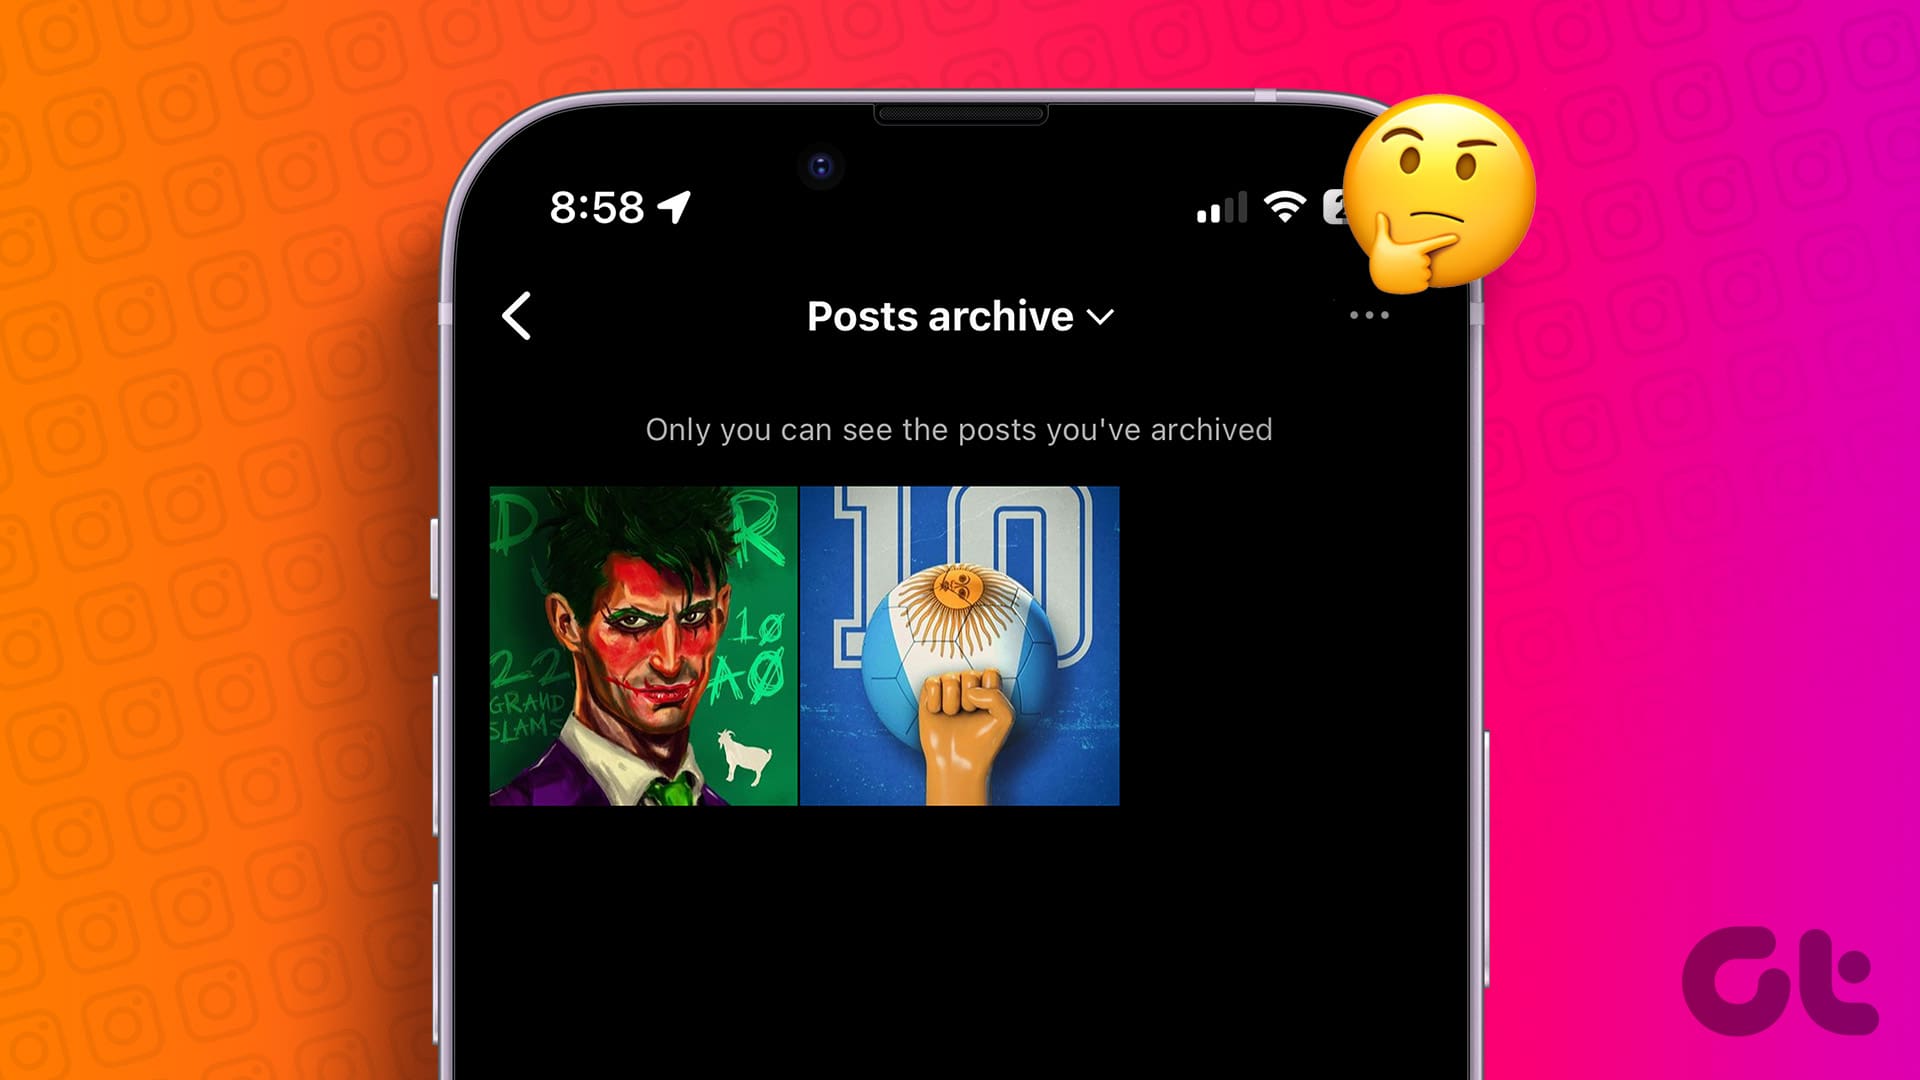 What happens when you archive a post on instagram